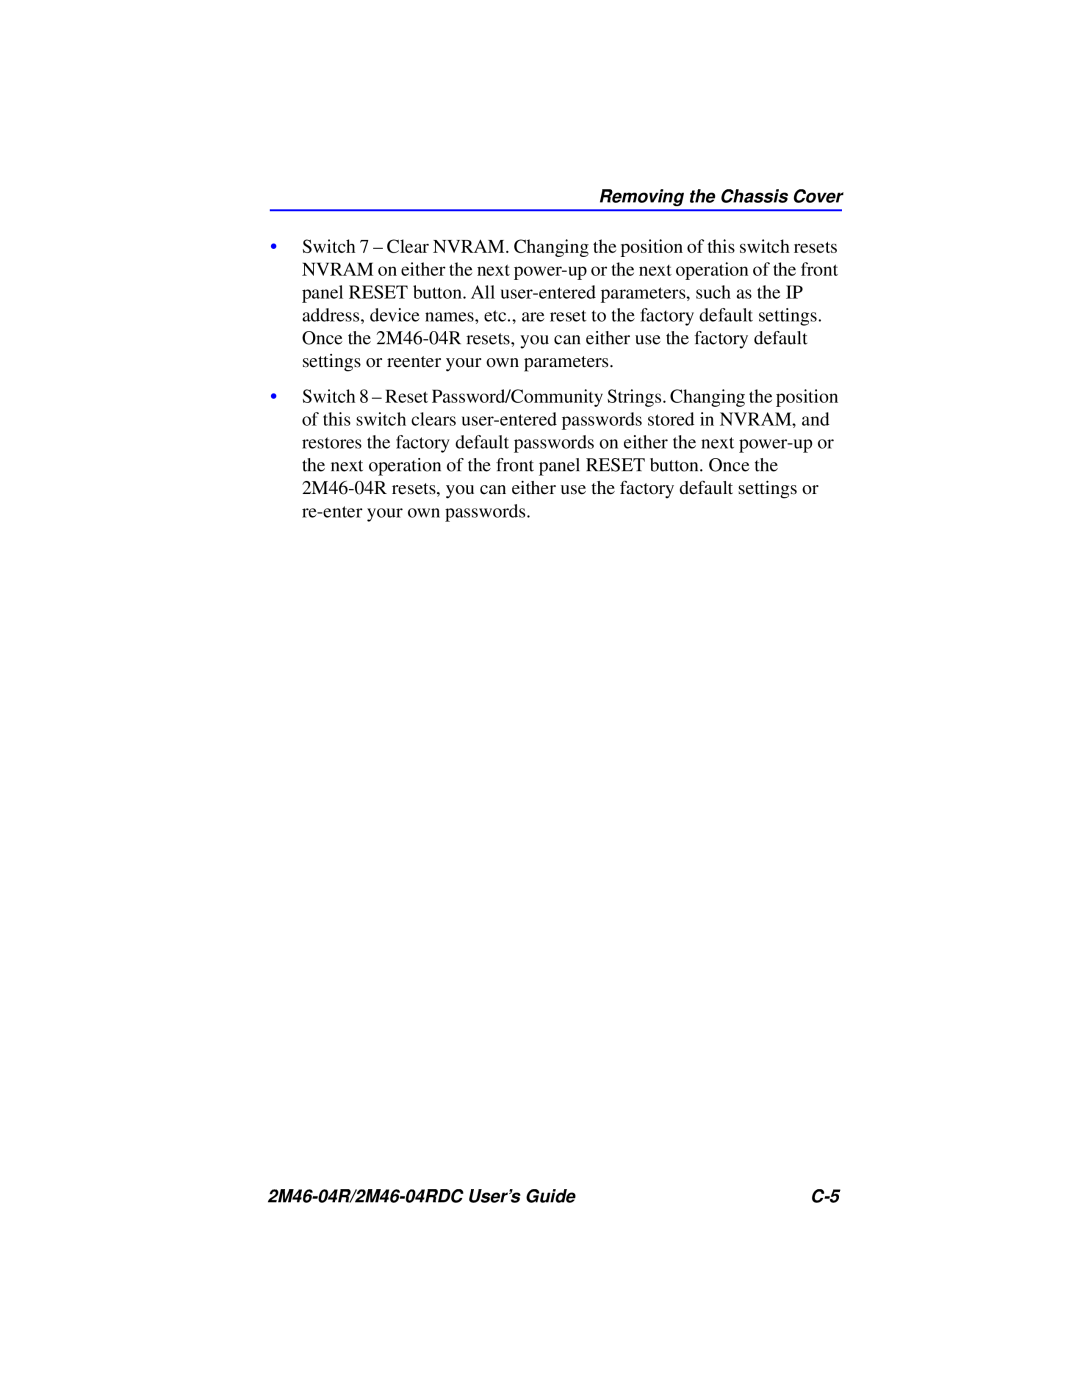 Cabletron Systems pmn manual 